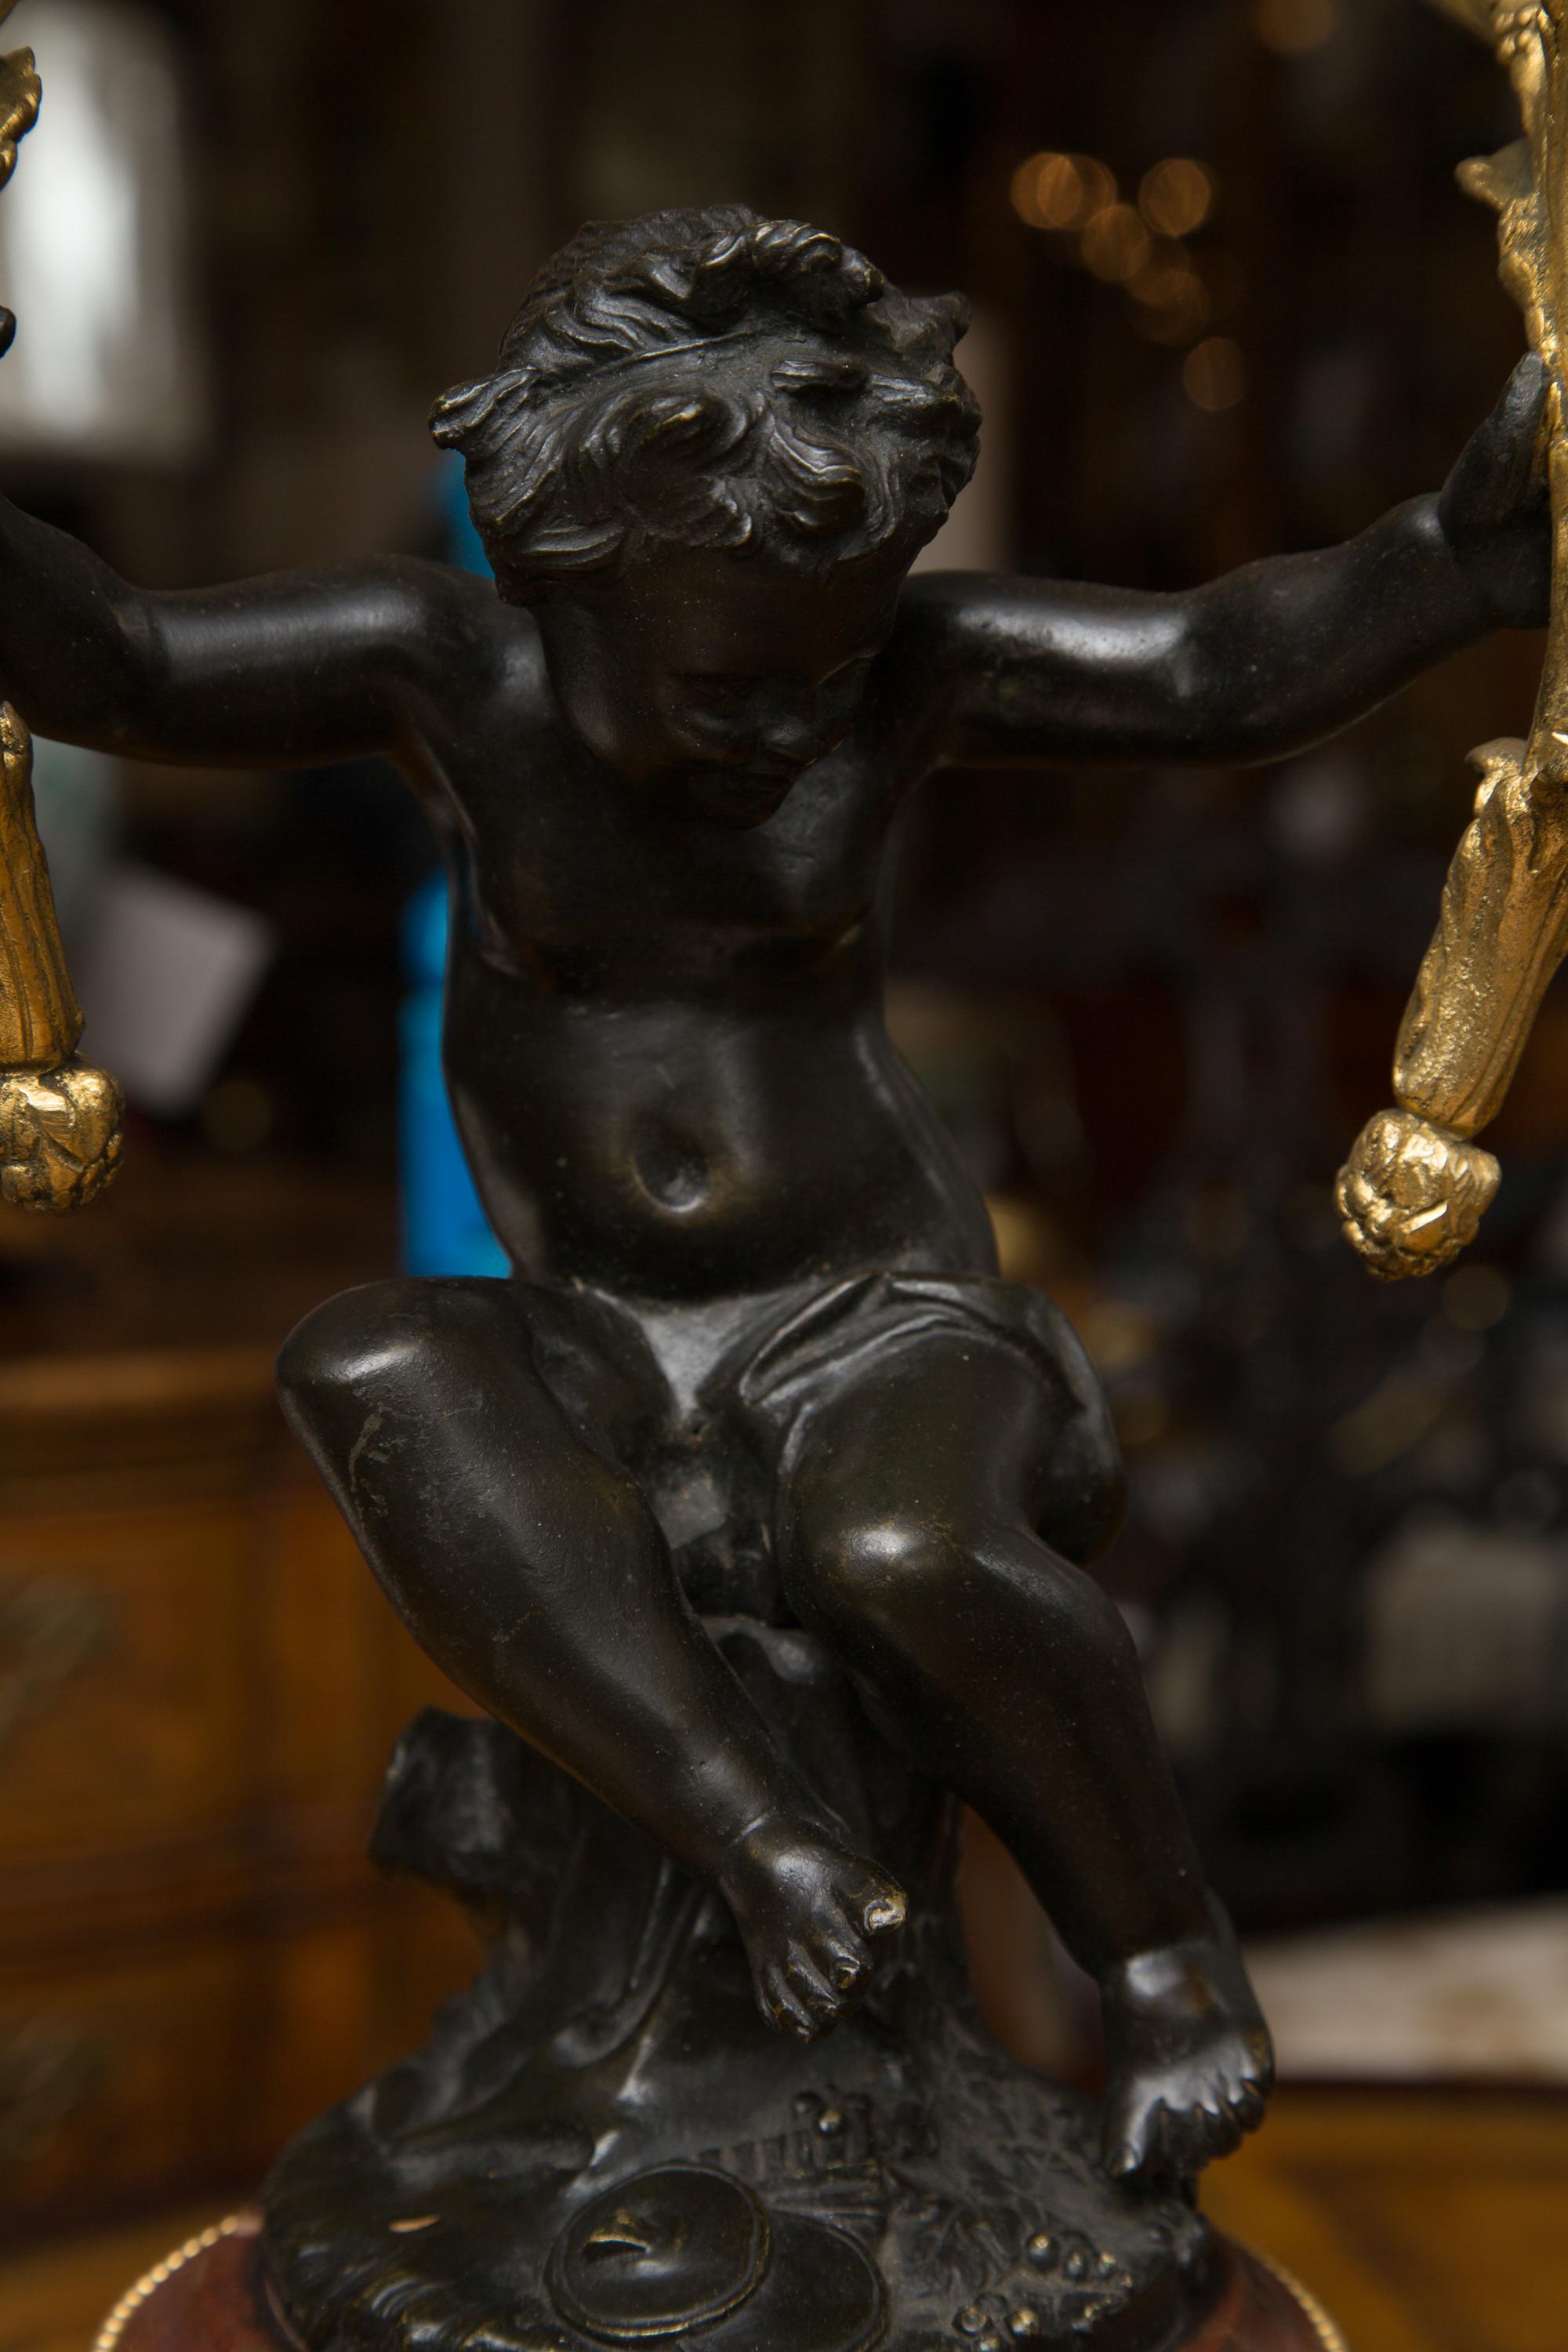 These are impressive pair of 19th century gilt metal candelabra held by an exquisitely patinated bronze cherubs'. They are placed on rouge marble and decorated circular bases decorated also with gilt metal accents. The black plinths add a depth to